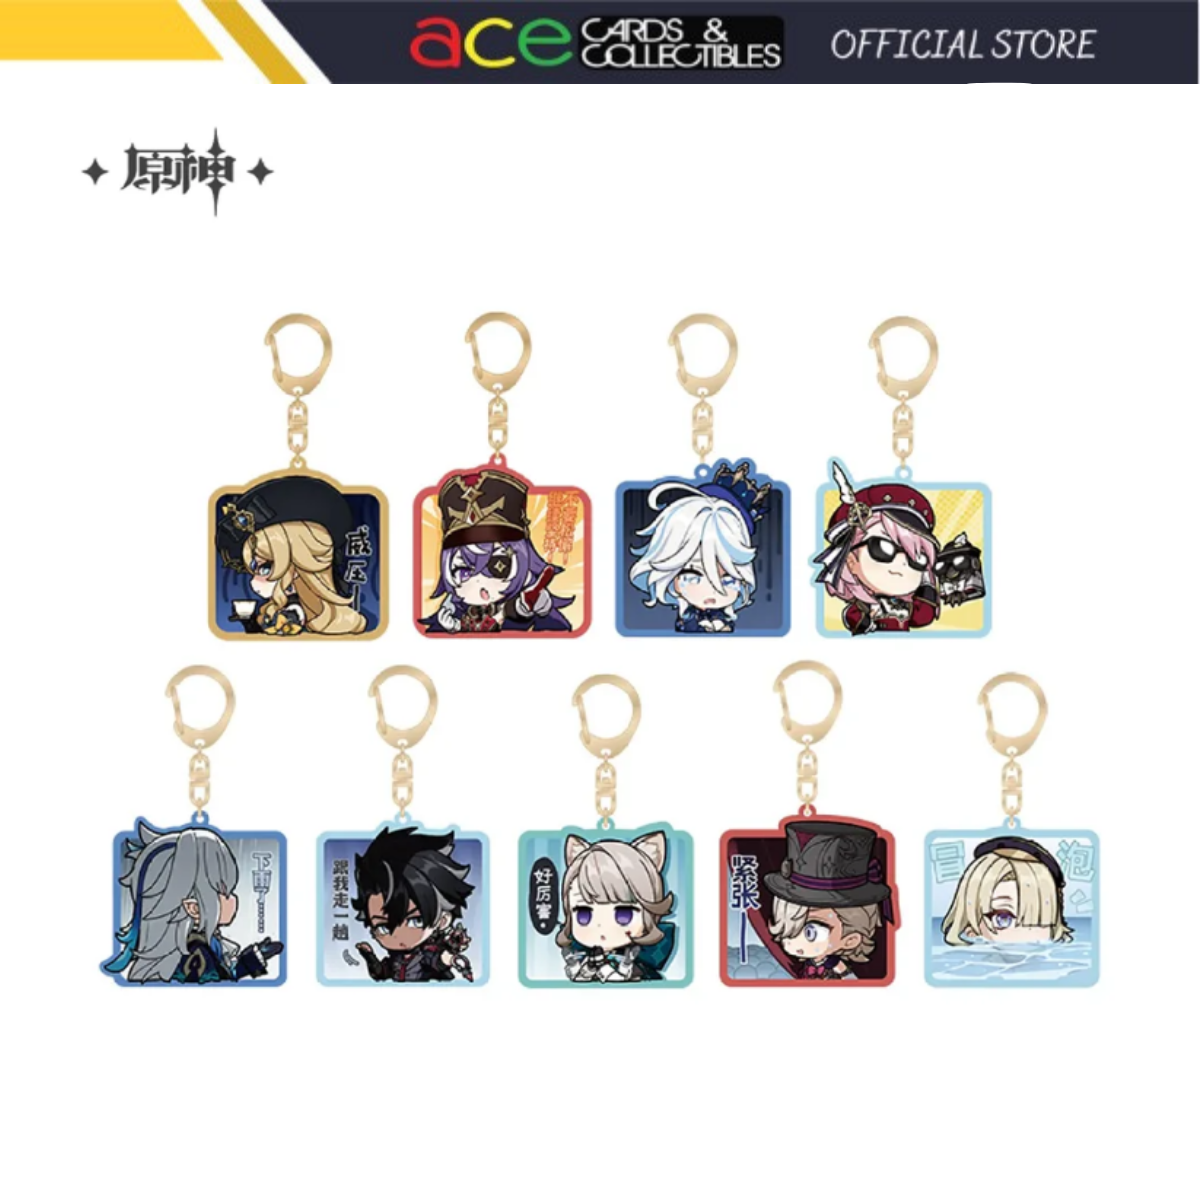 miHoYo Genshin Impact Chibi Fontaine Character Expression Sticker Keychain-Lyney-miHoYo-Ace Cards &amp; Collectibles